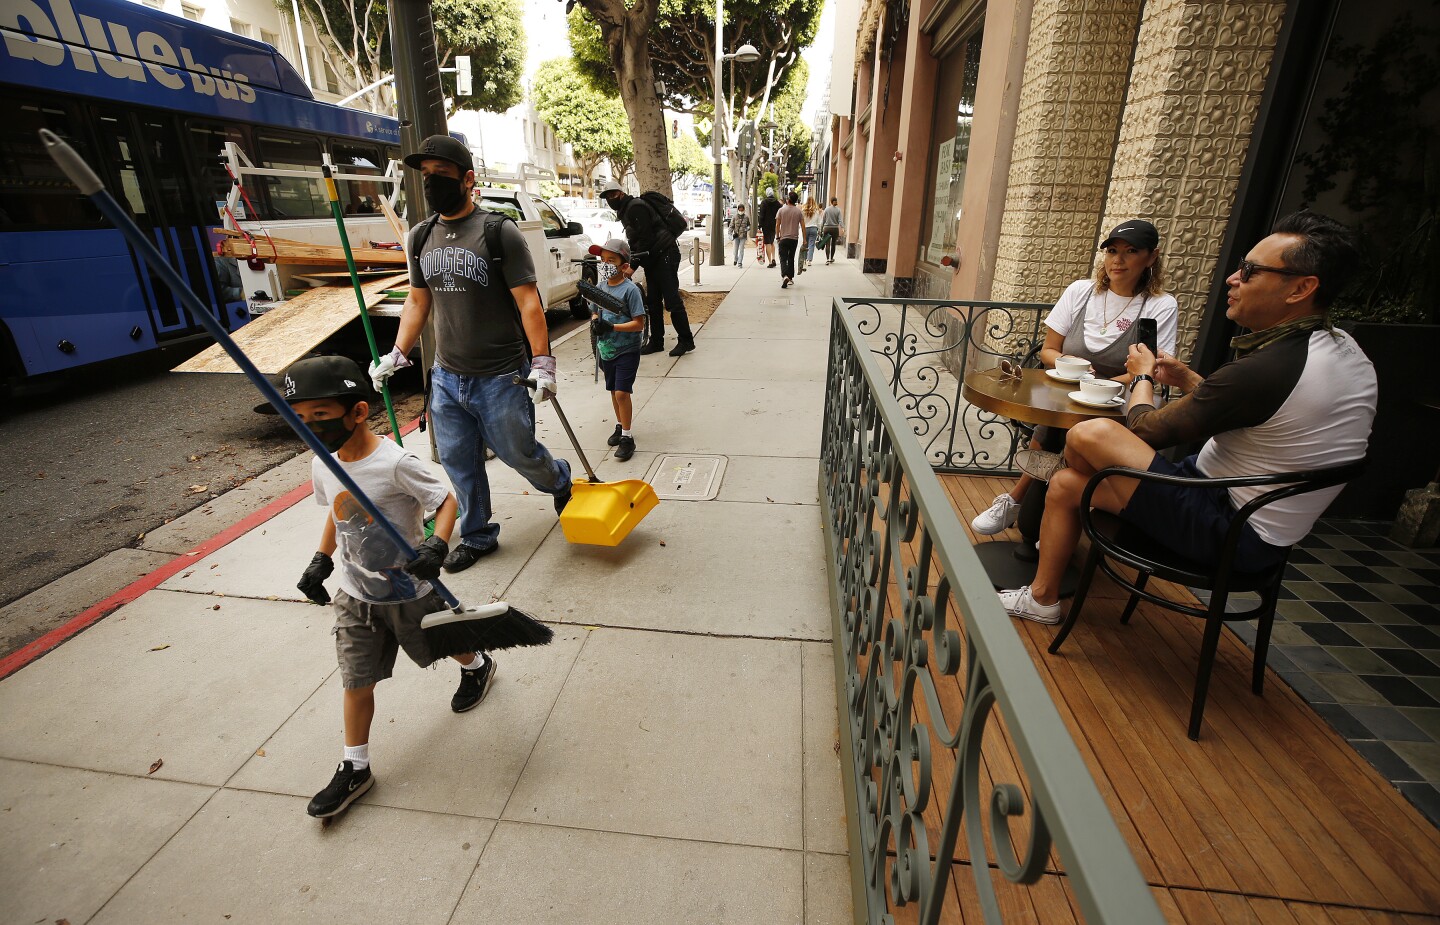 Gilbert Haro with sons Richard, 8, and James, 6, walk 4th street in the upscale shopping district of Santa Monica Monday morning looking to help cleanup after looters destroyed numerous stores.